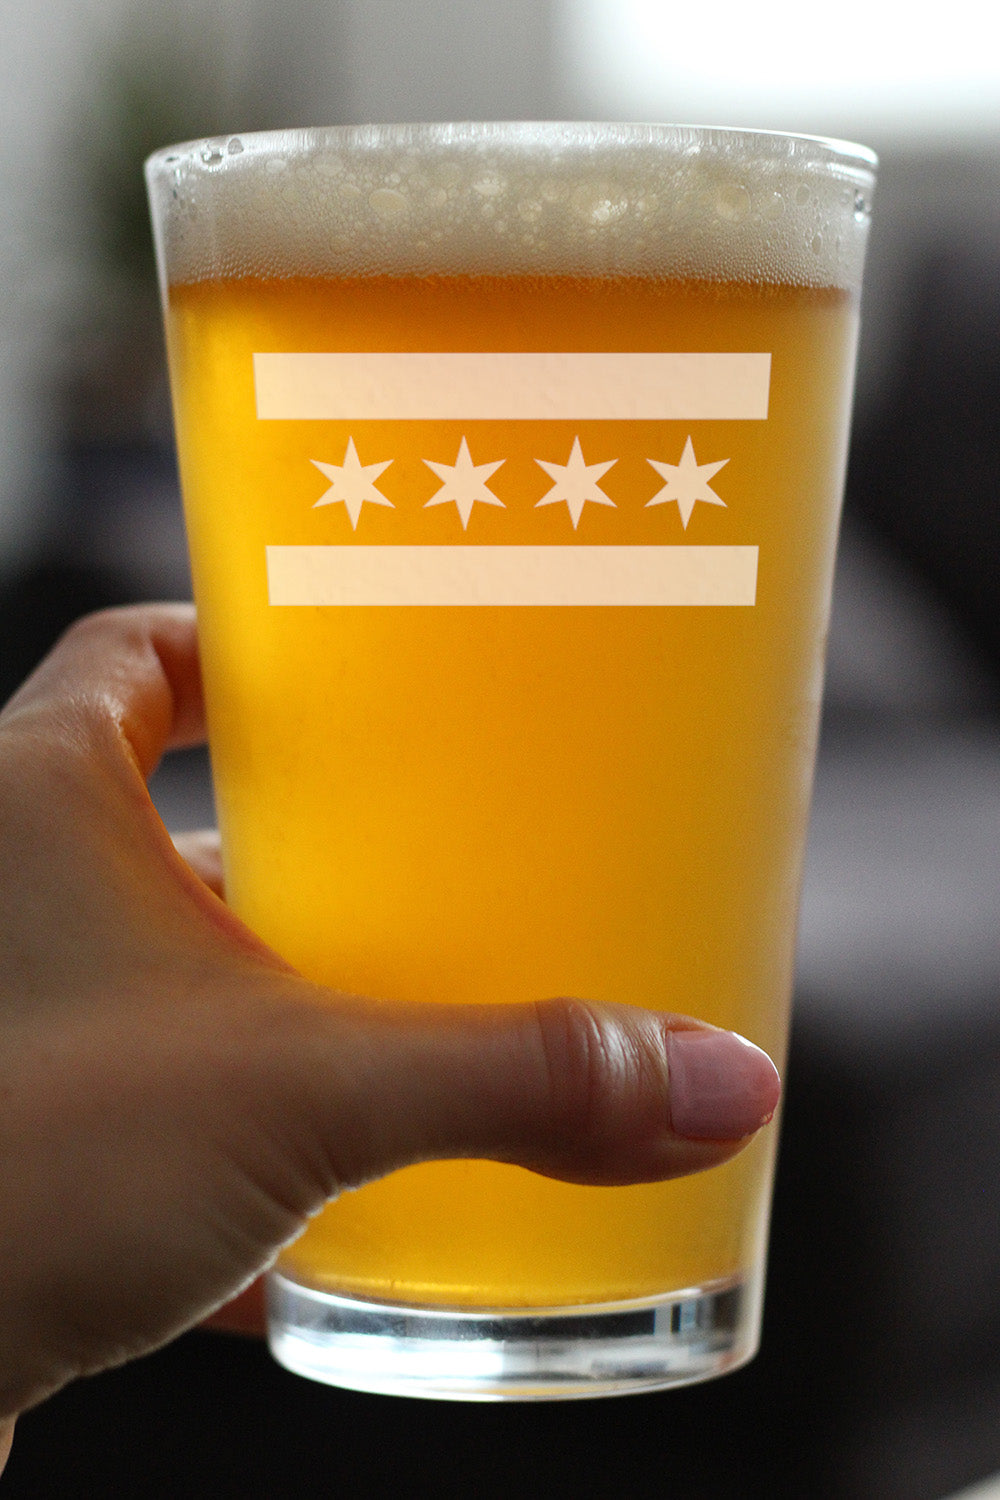 Chicago Flag Fun Pint Glass for Beer Gift for Chitown Lovers - Cute Chicago Themed Décor - 16 oz Drinking Glasses